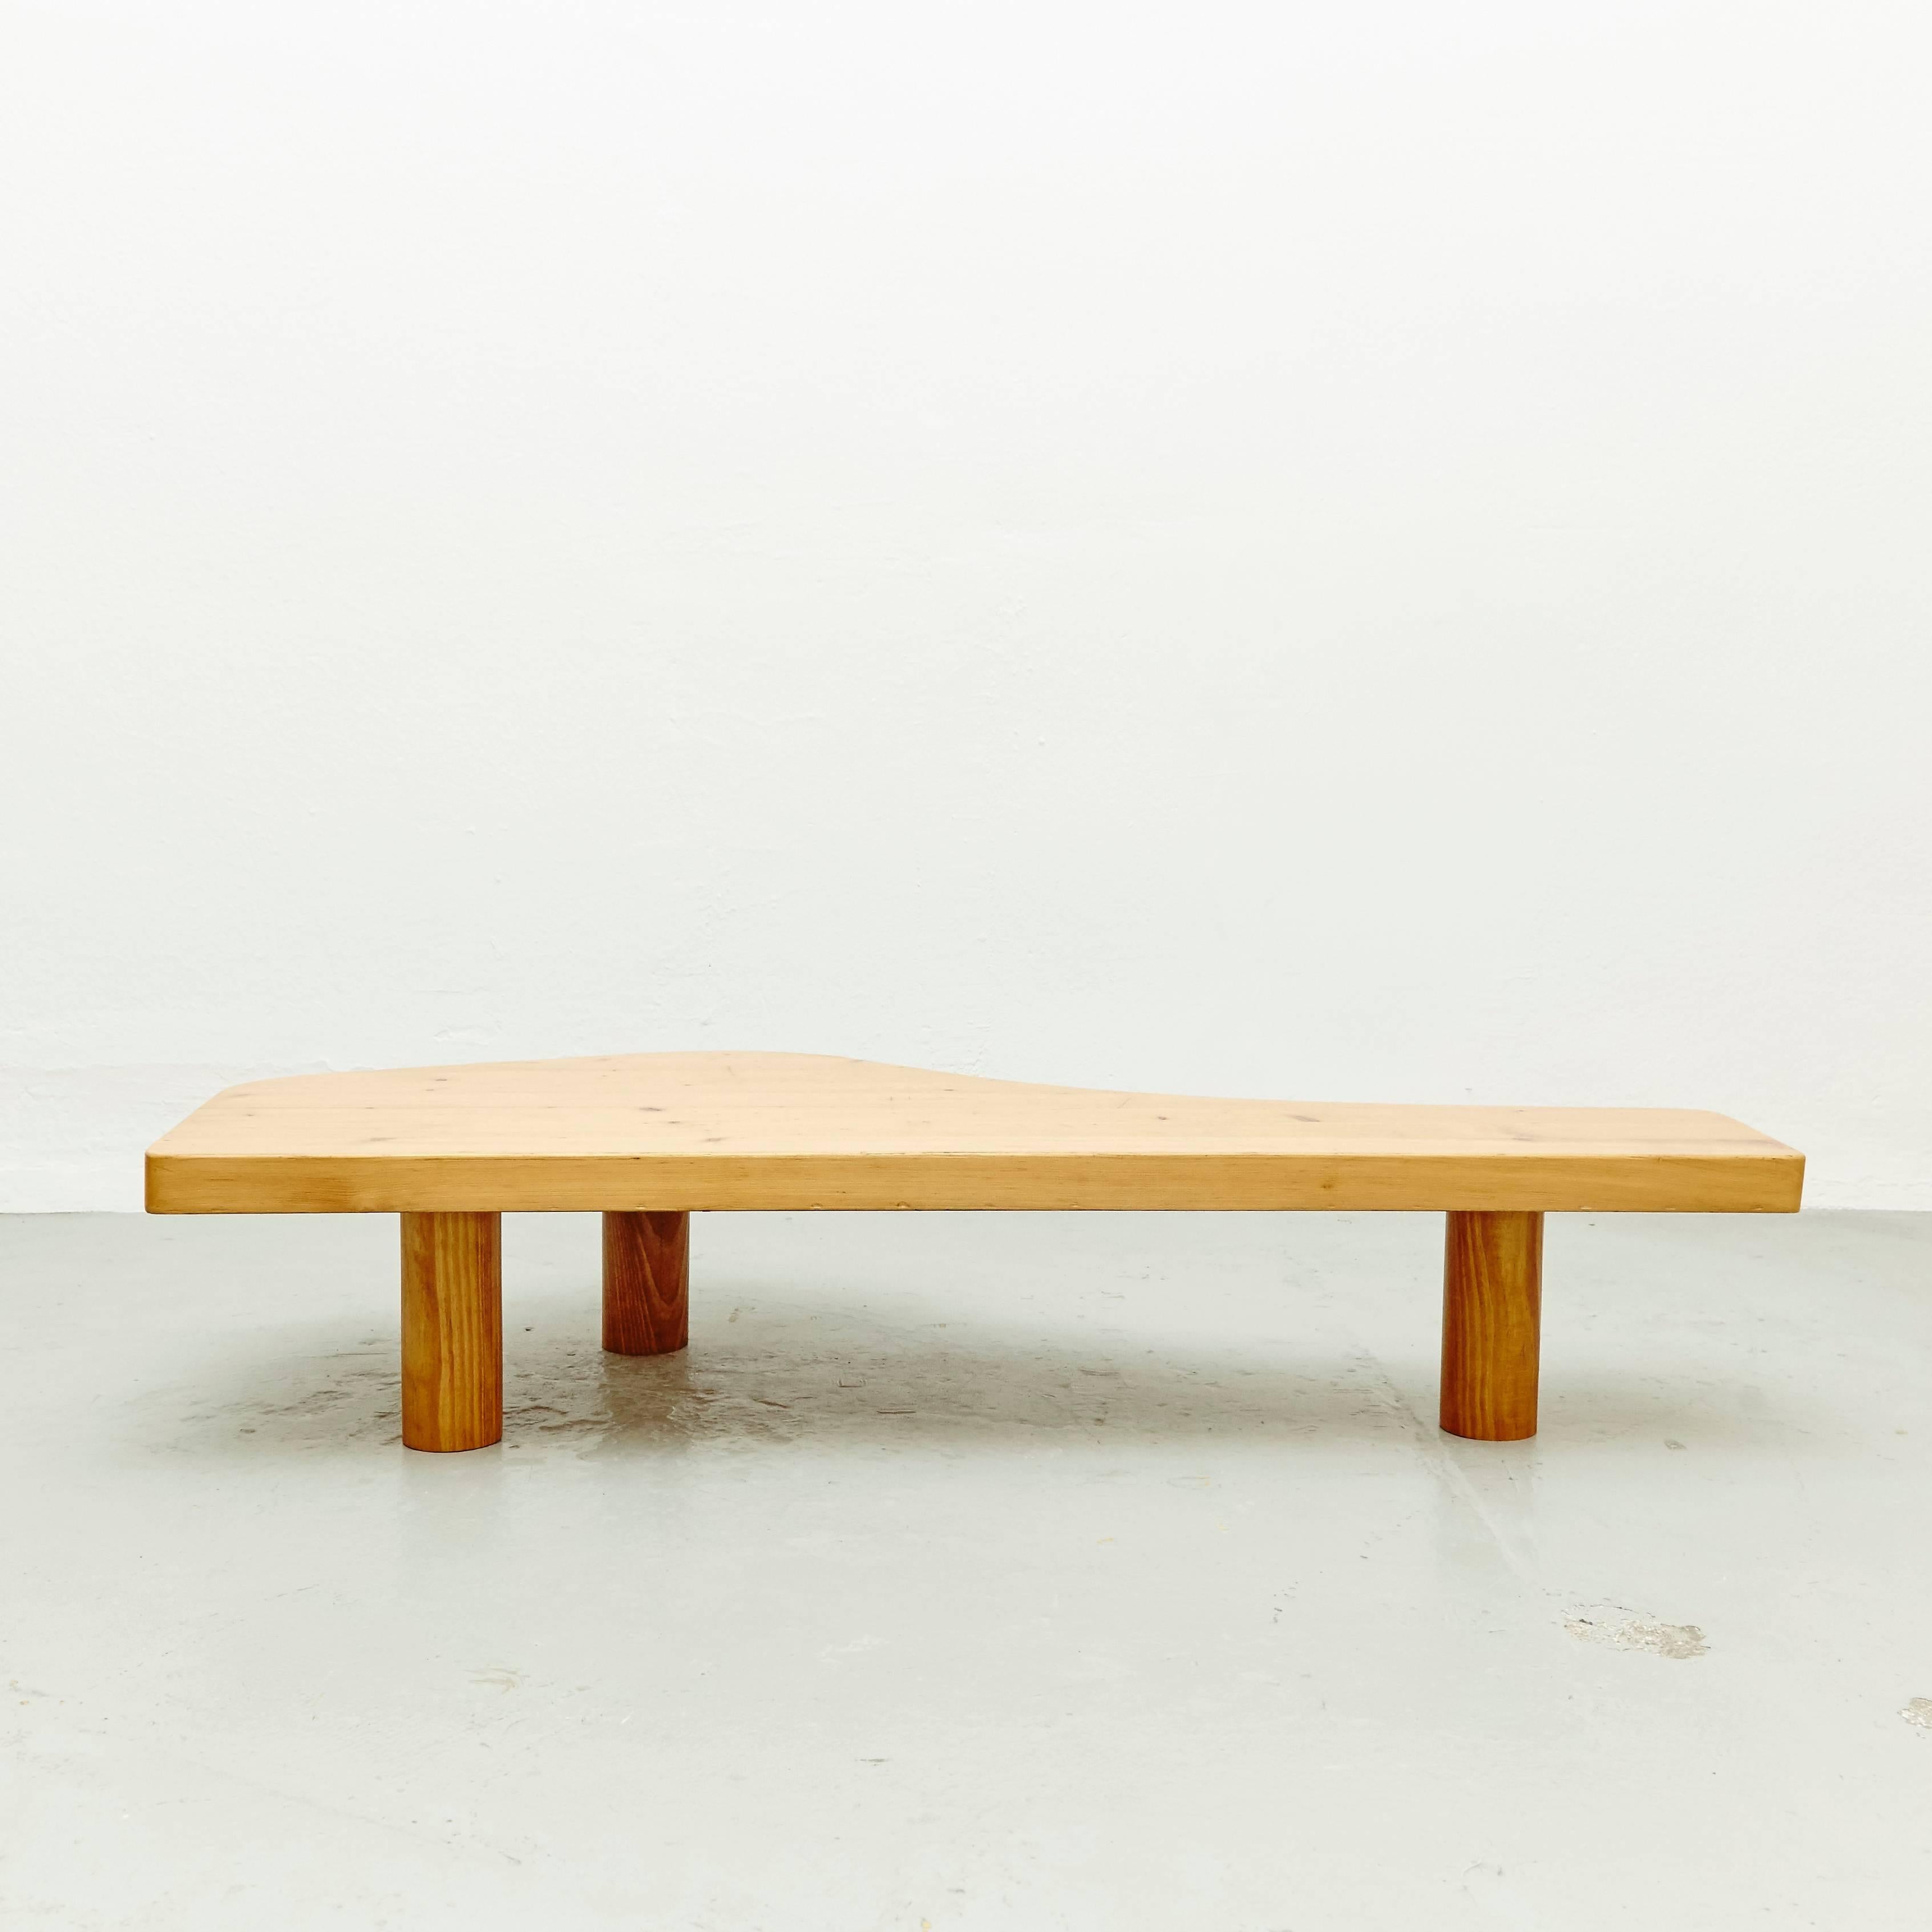 Free-form low table by Charlotte Perriand for Les Arcs ski resort, circa 1960, manufactured in France.
Pinewood.

Probably it was manufactured by the previuos owner circa 1970 using and originald Perriand table from Les Arcs Bar and adding three